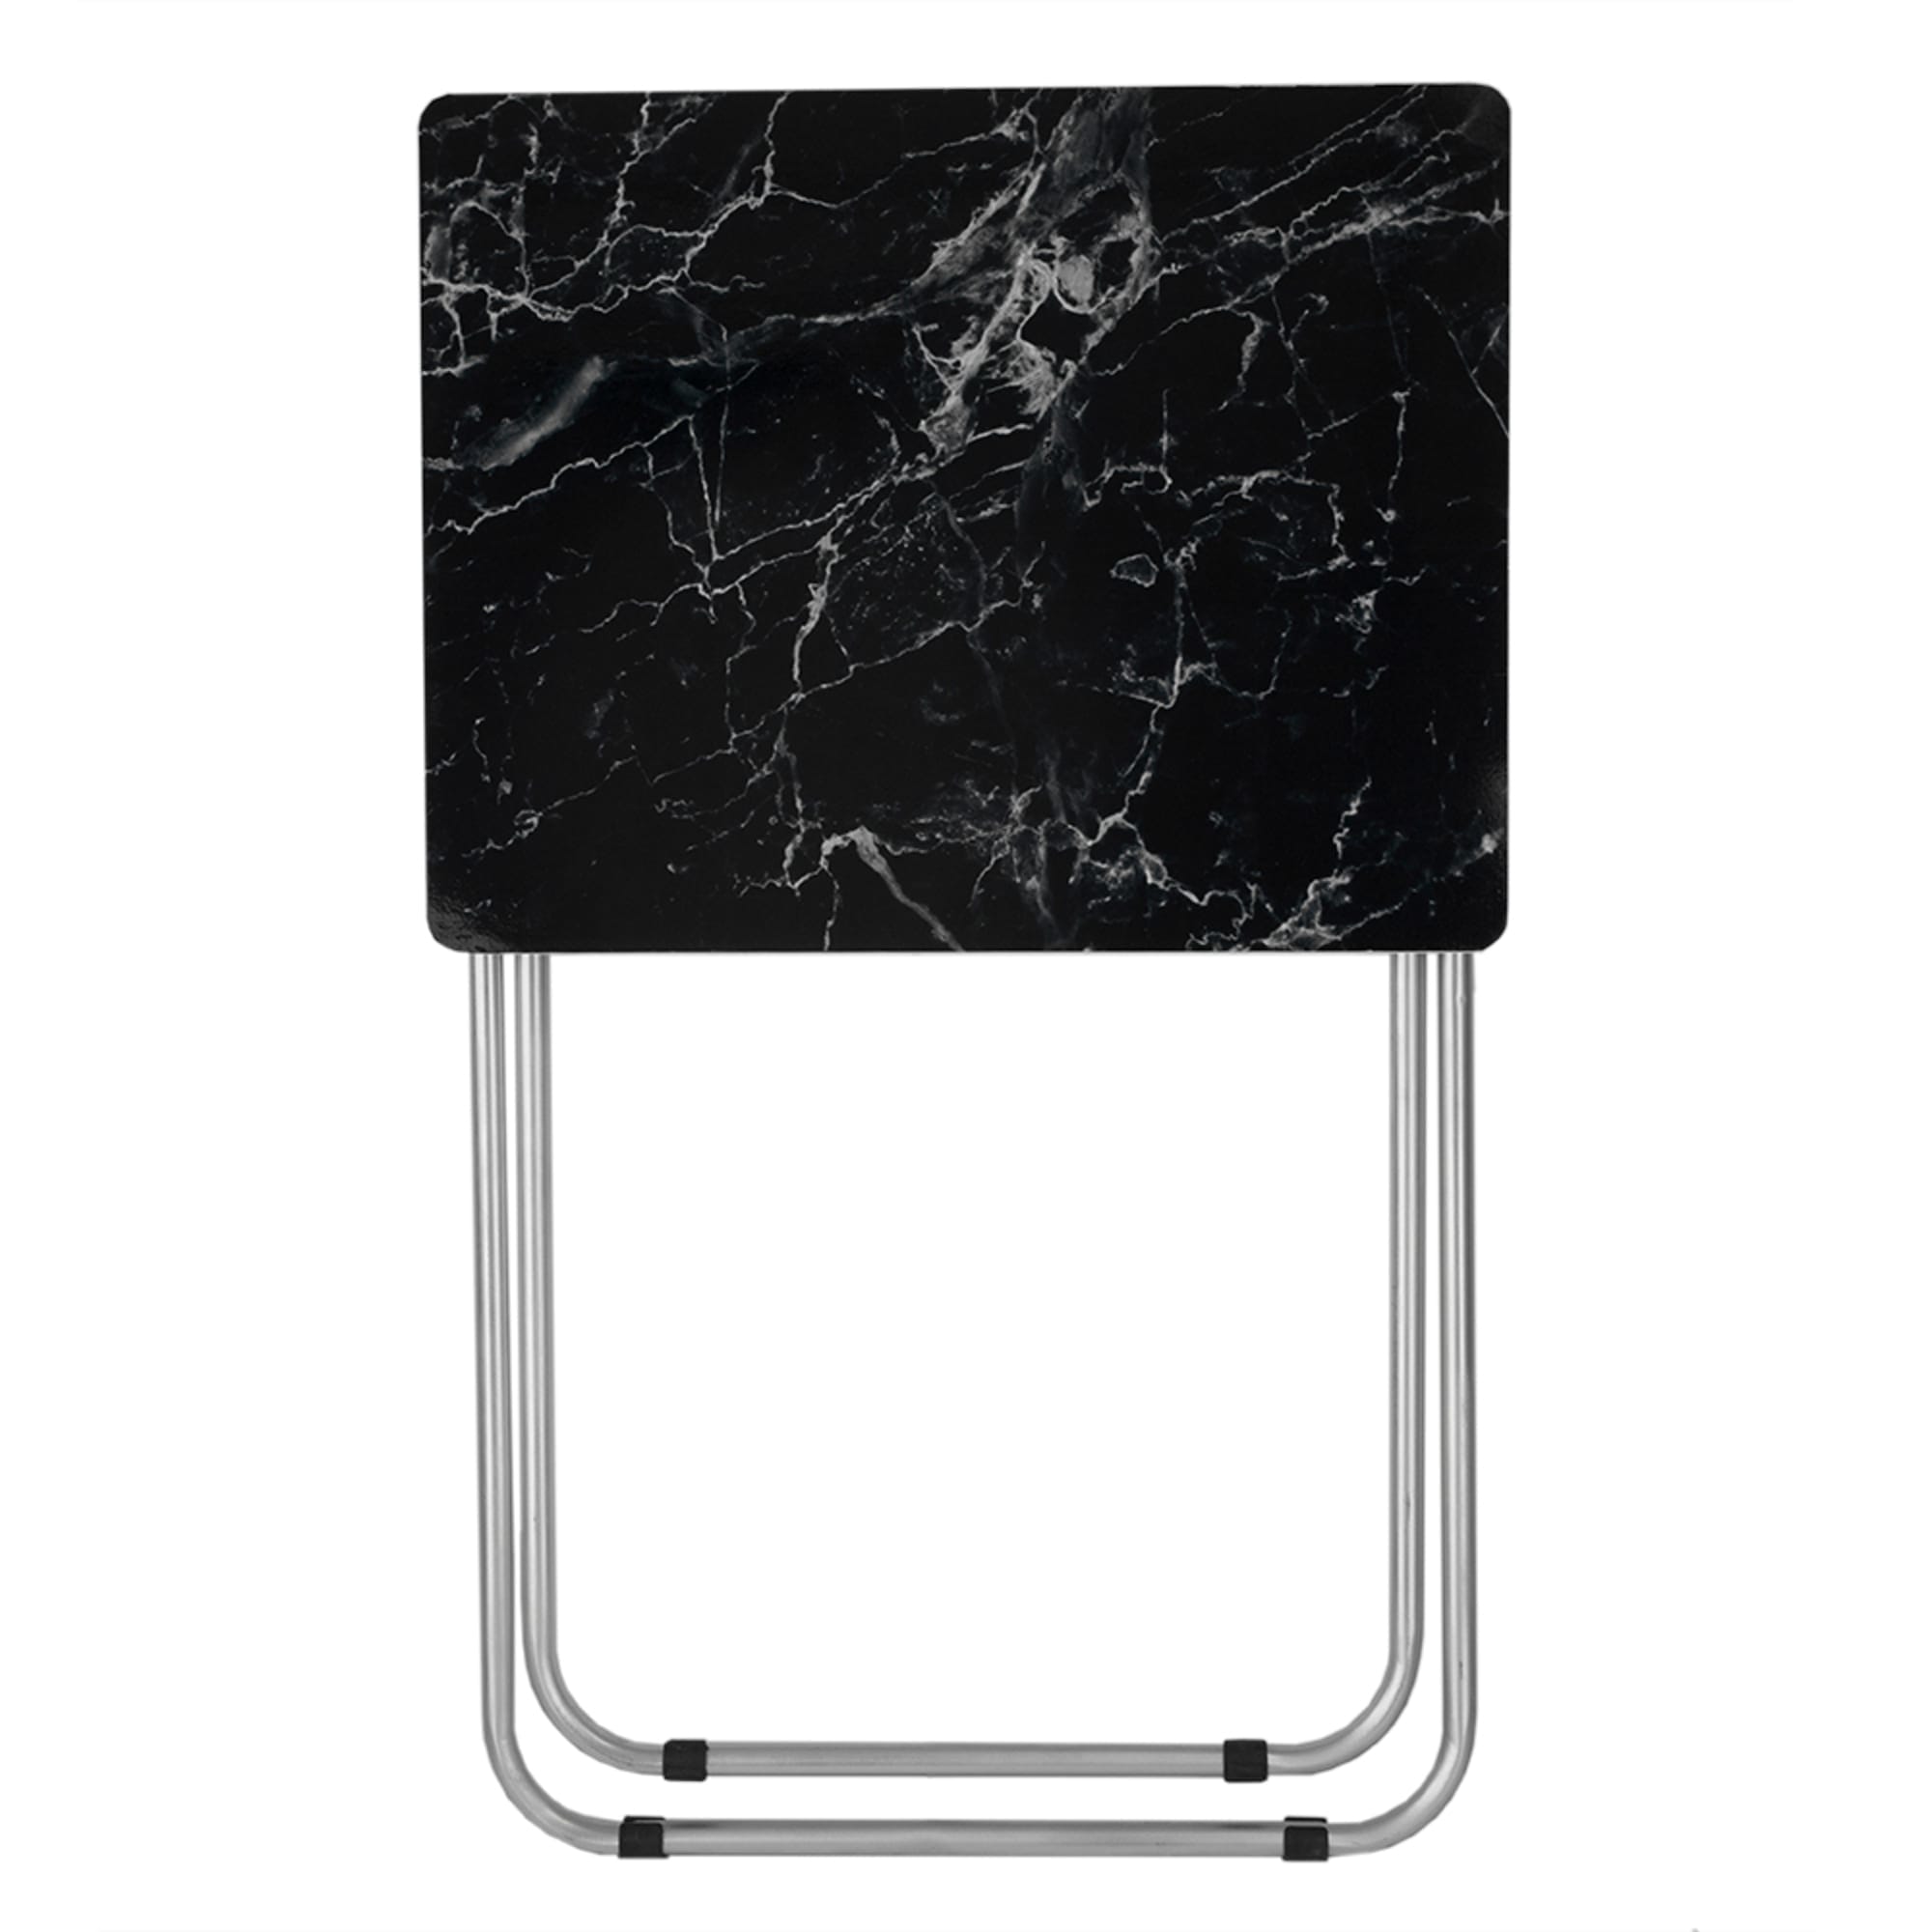 Home Basics Faux Marble Multi-Purpose Foldable Table, Black $15.00 EACH, CASE PACK OF 6